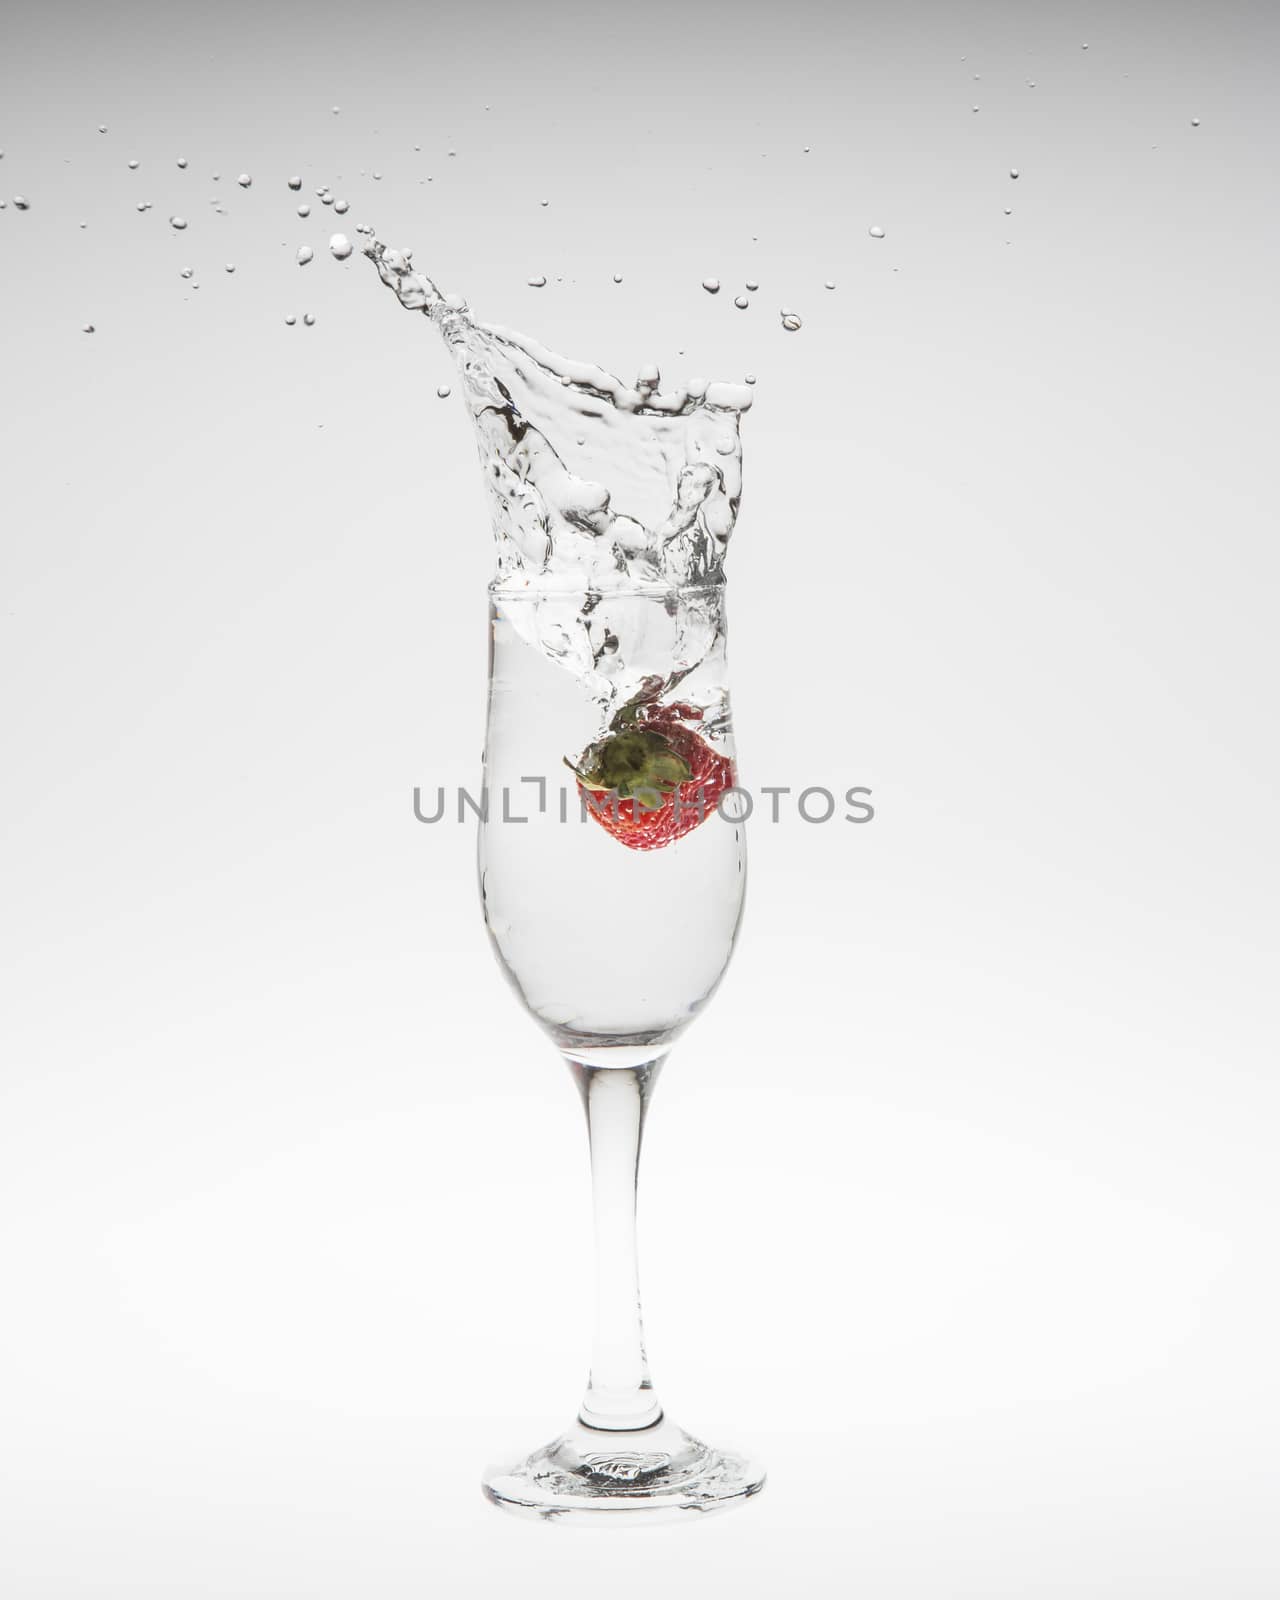 Strawberry falls deeply under water with a splash on white background